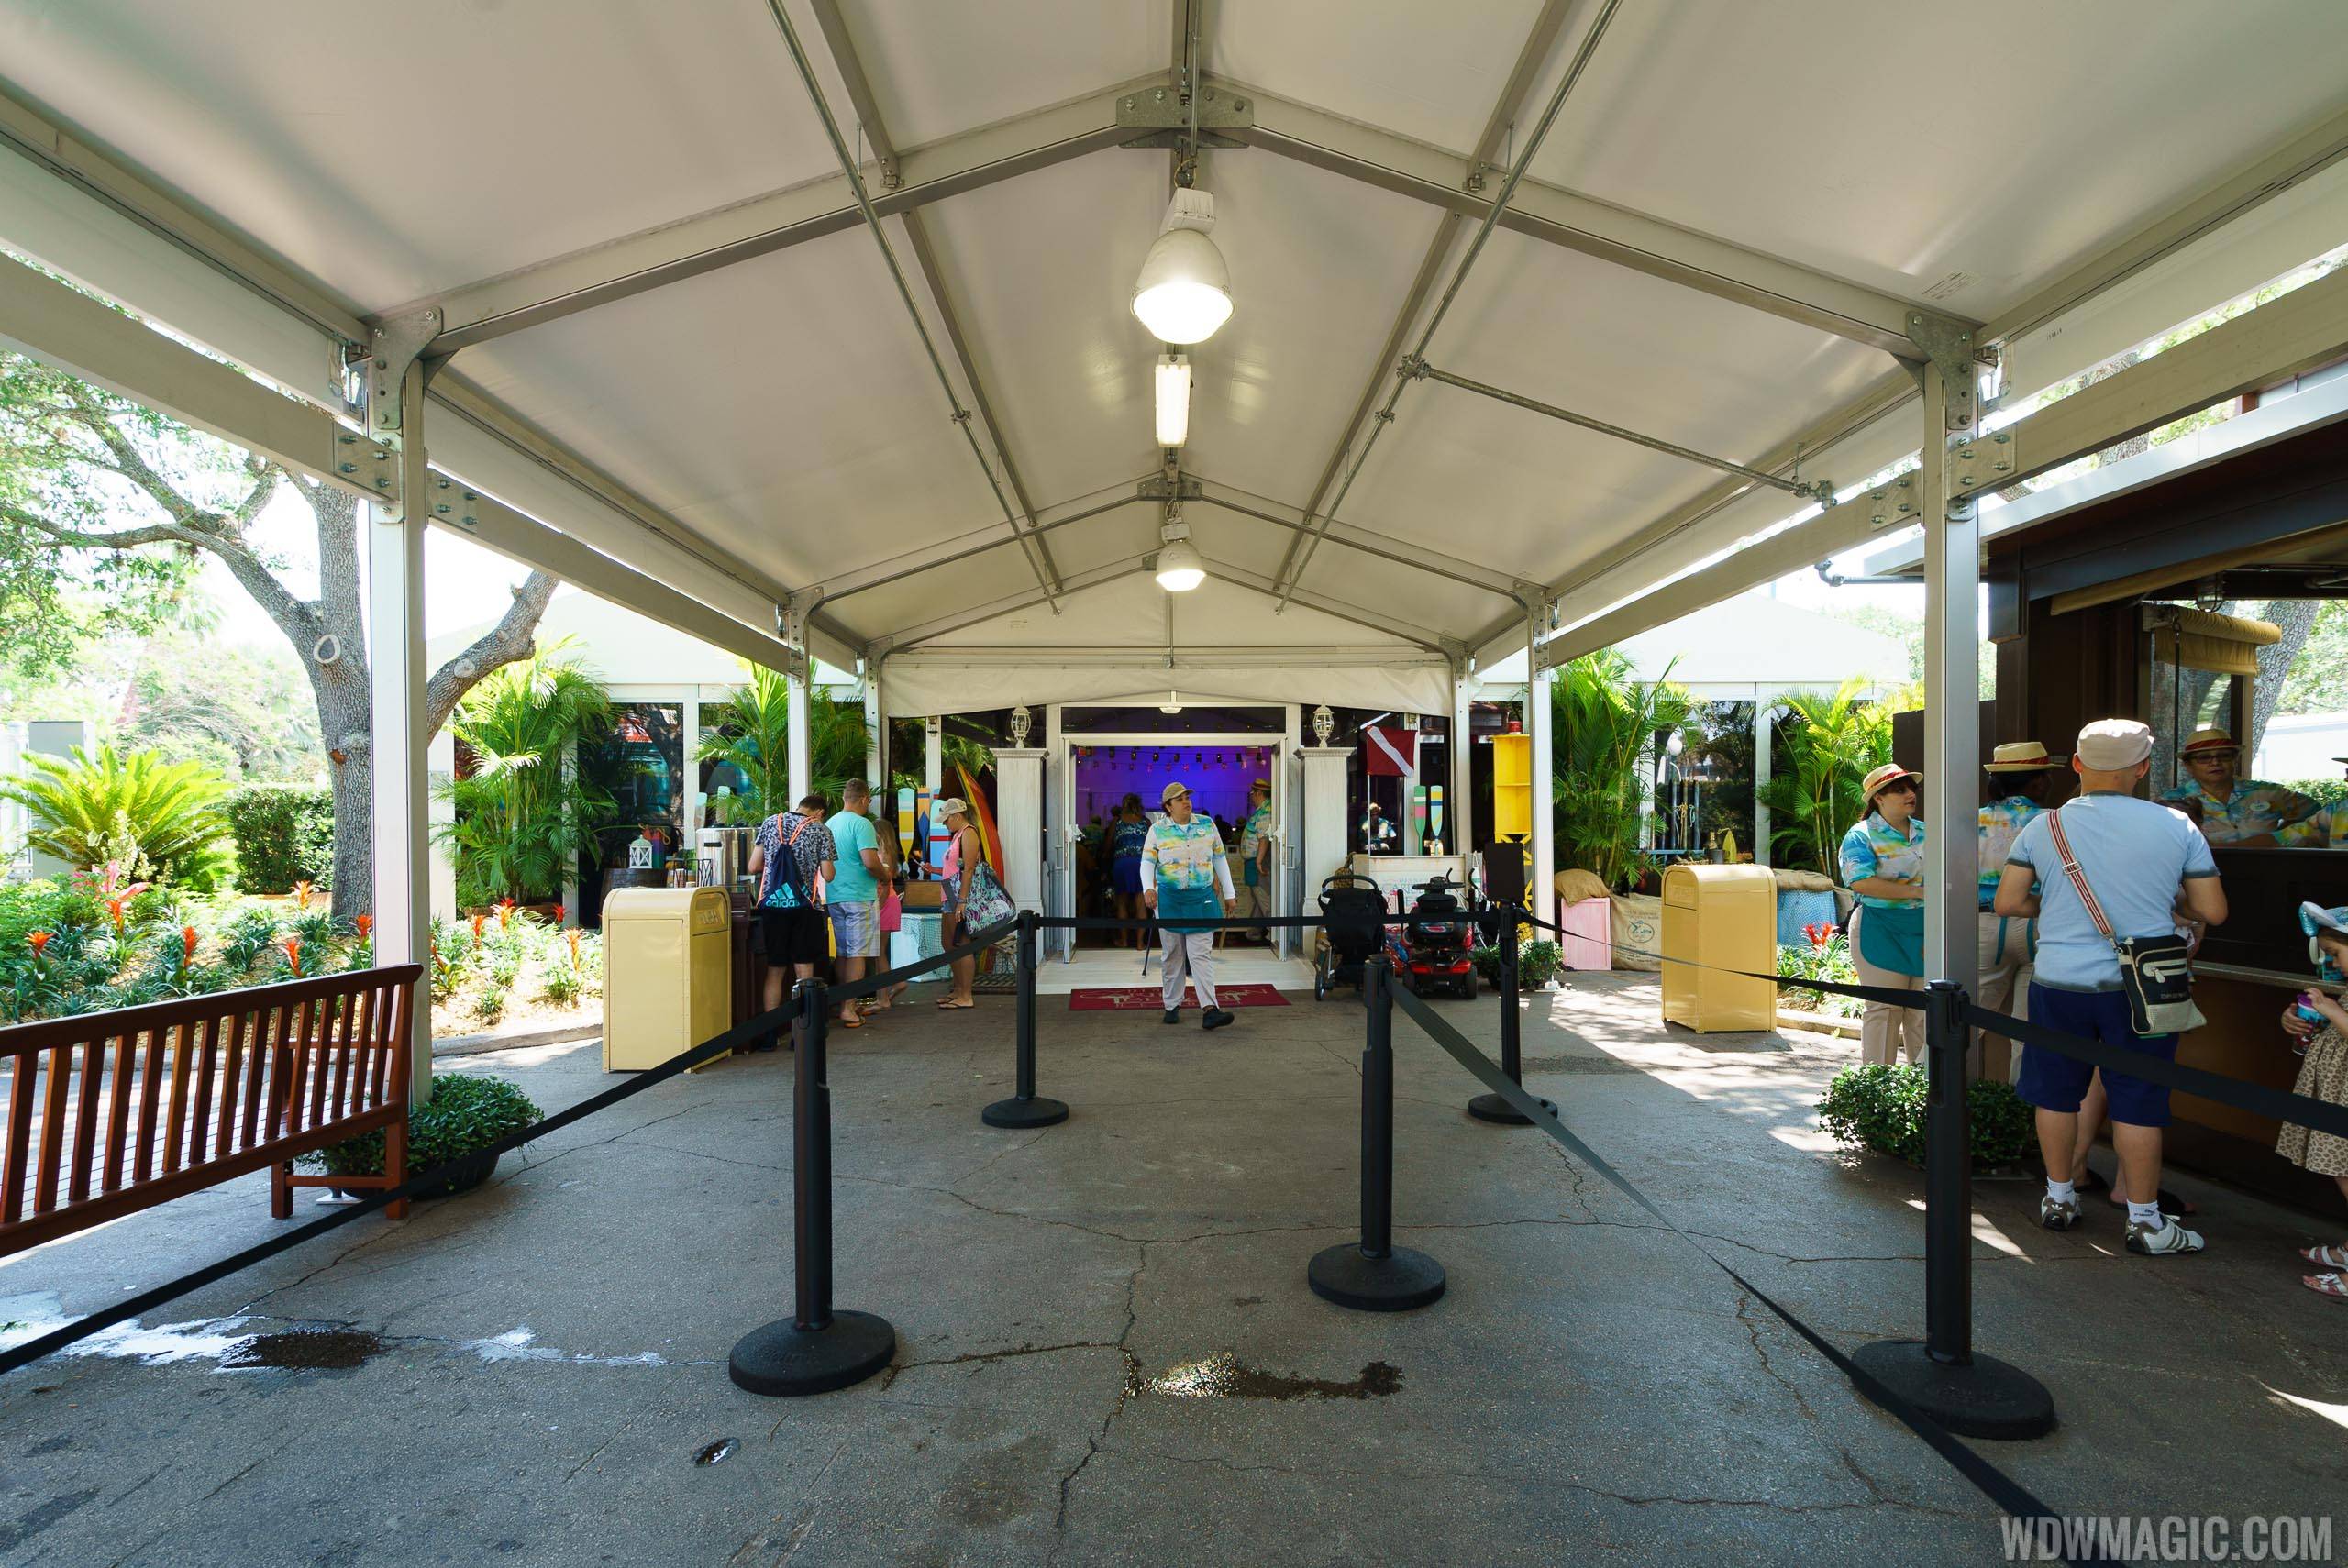 Entrance to the dining marquee